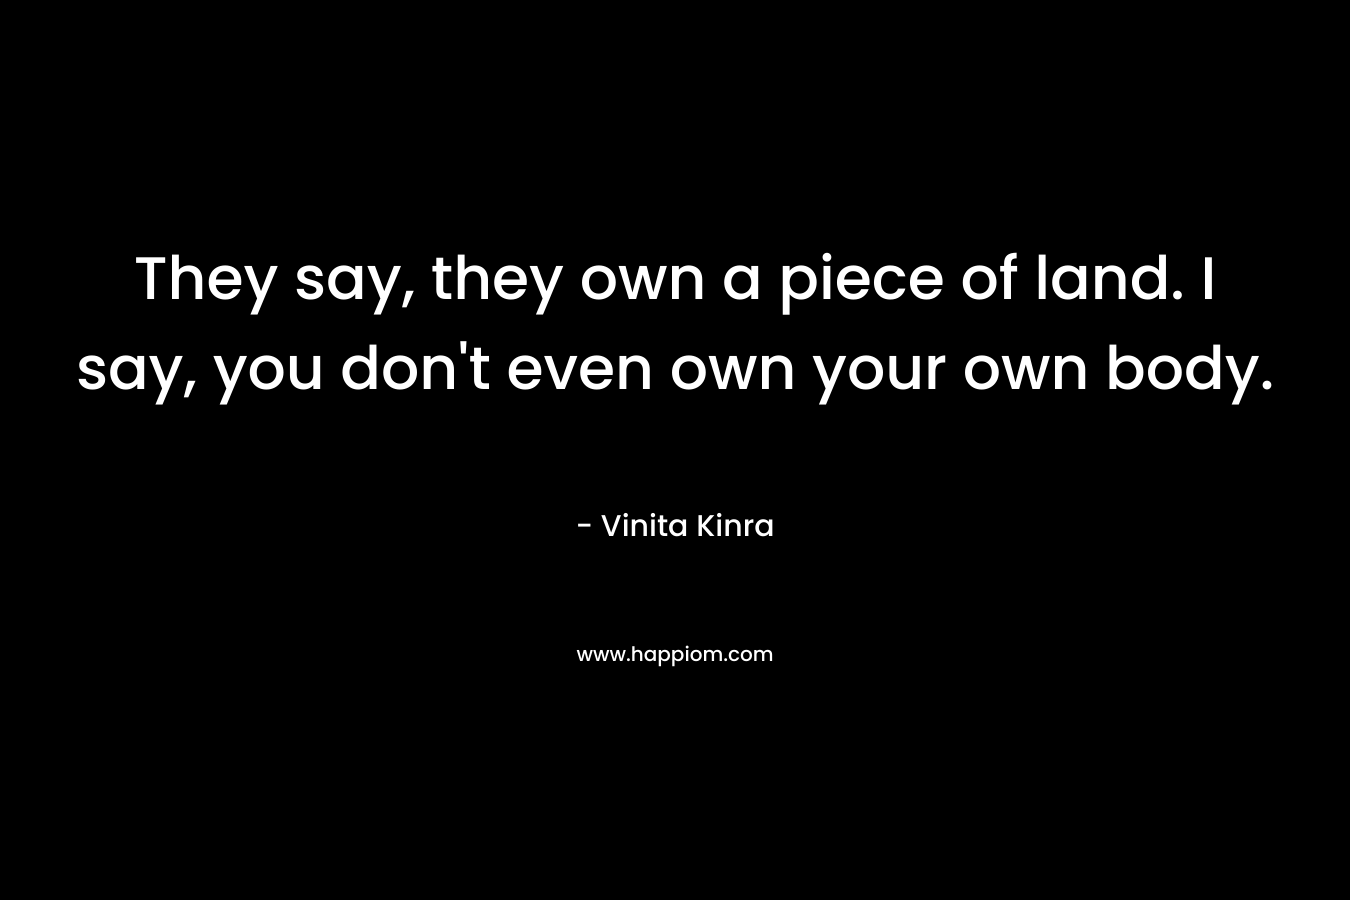 They say, they own a piece of land. I say, you don’t even own your own body. – Vinita Kinra